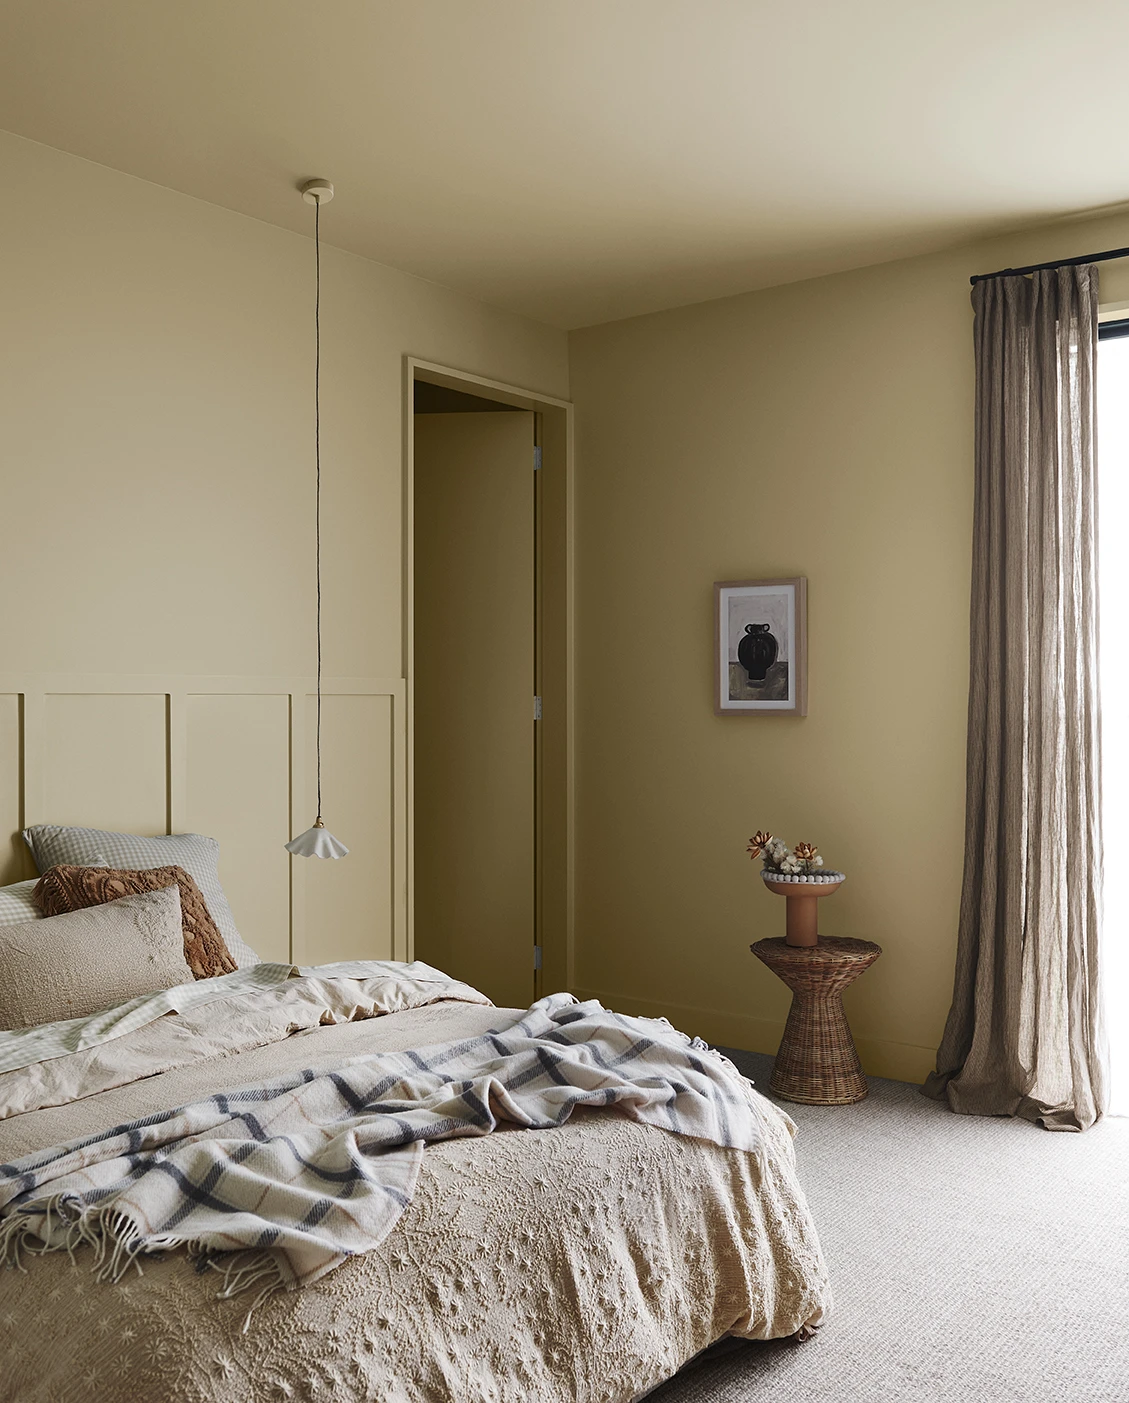 Bedroom with warm beige walls and ceiling and neutral curtains